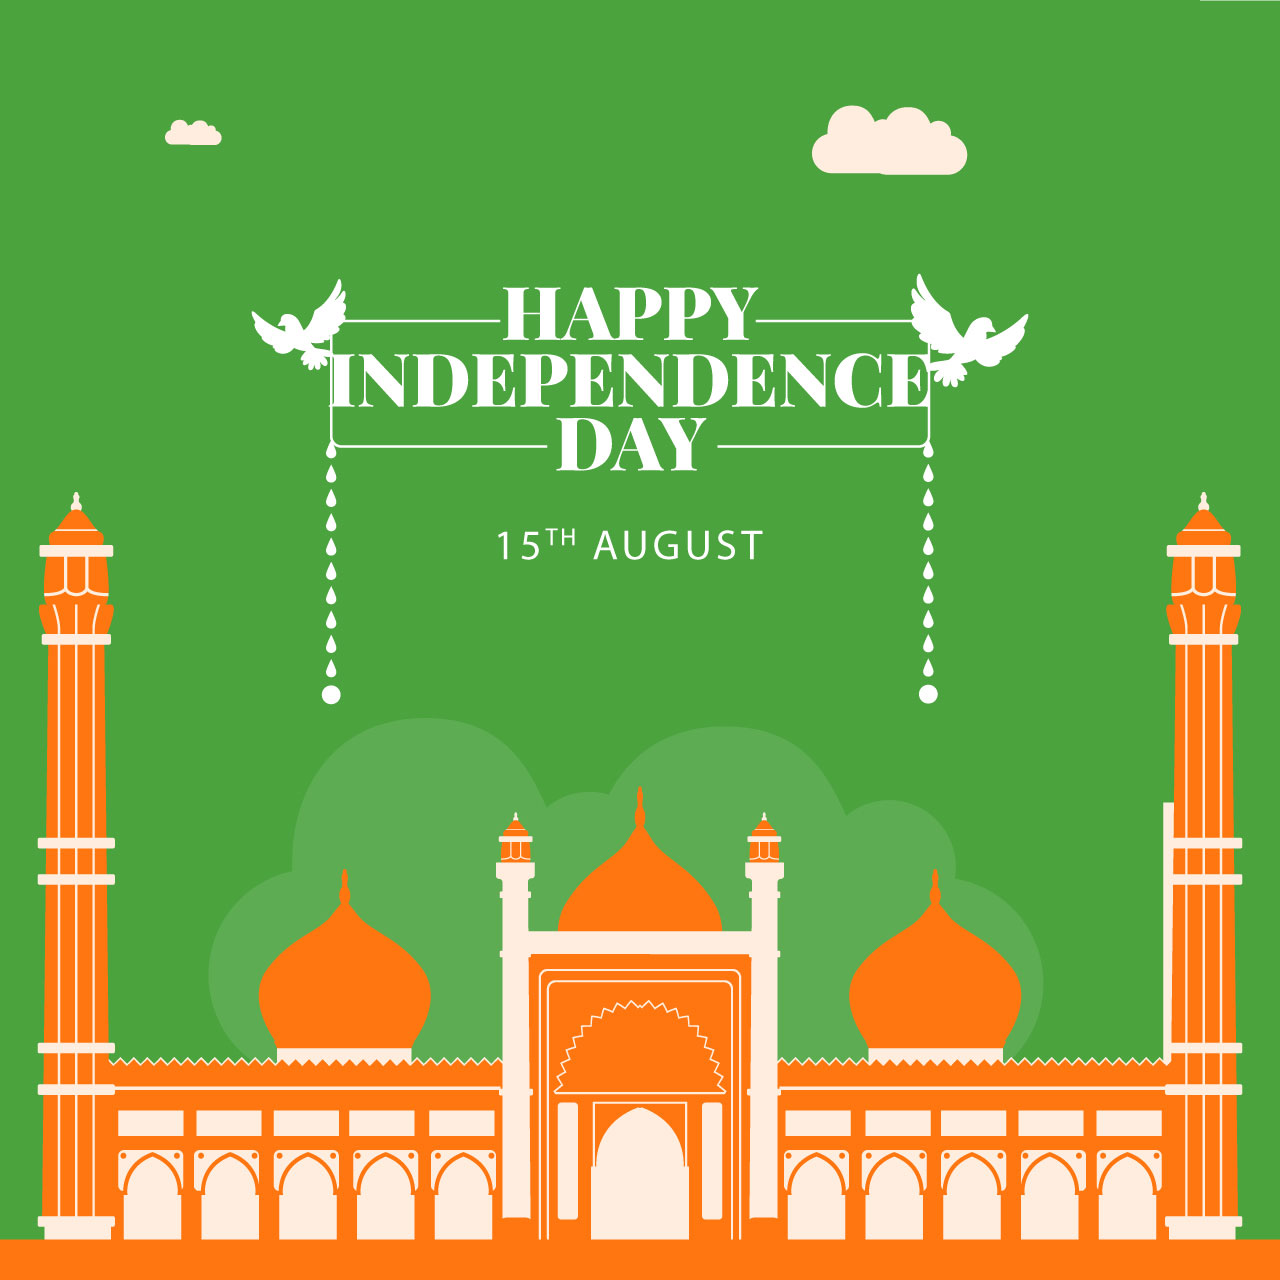 Creative happy indian independence day banner design cartoon illustration image